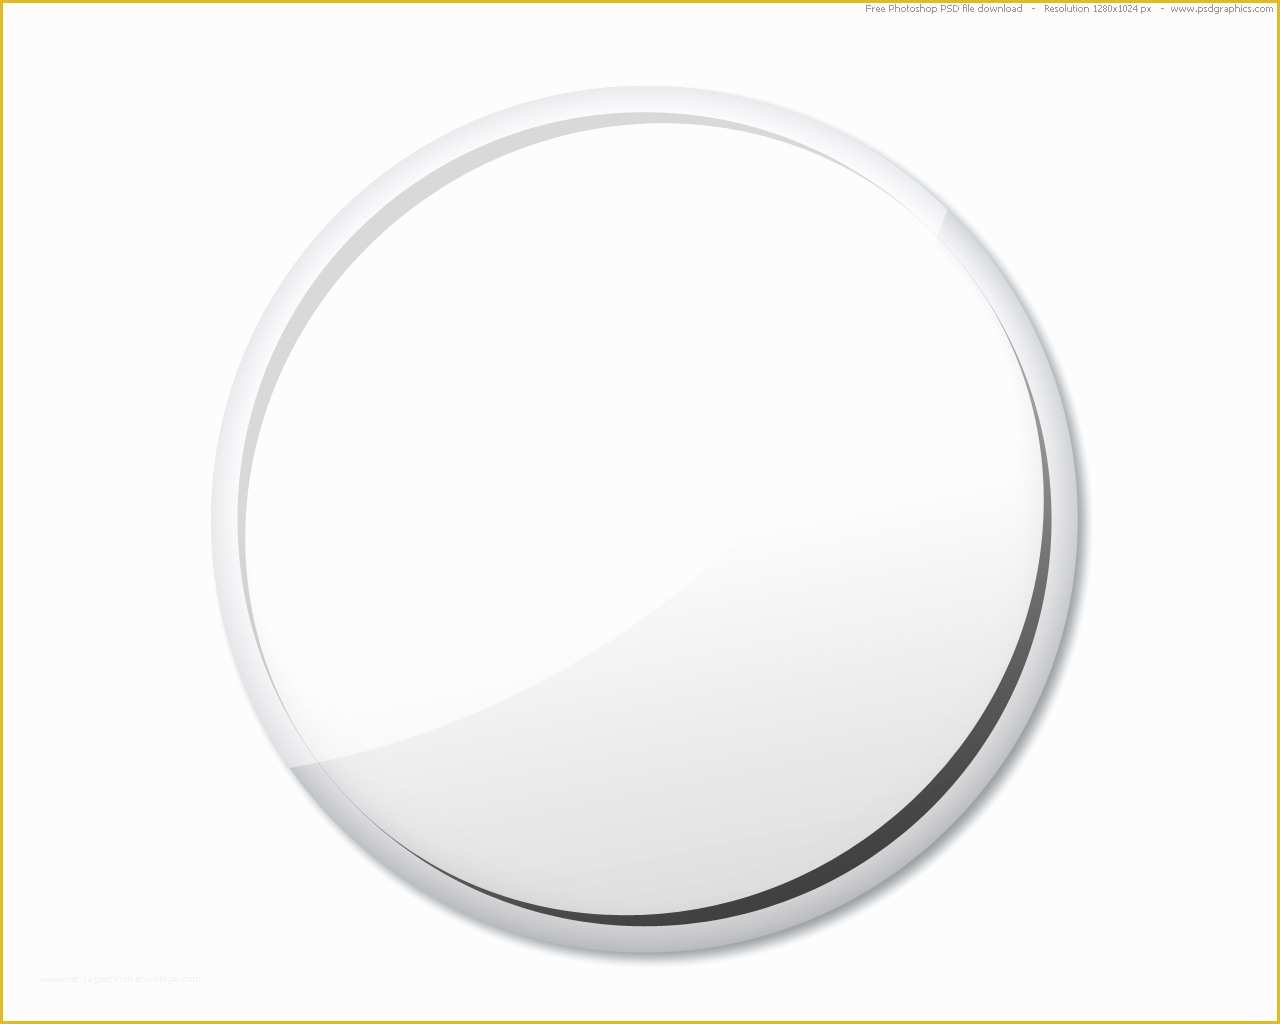 Campaign button Template Free Download Of Badge A Minit Template Photoshop